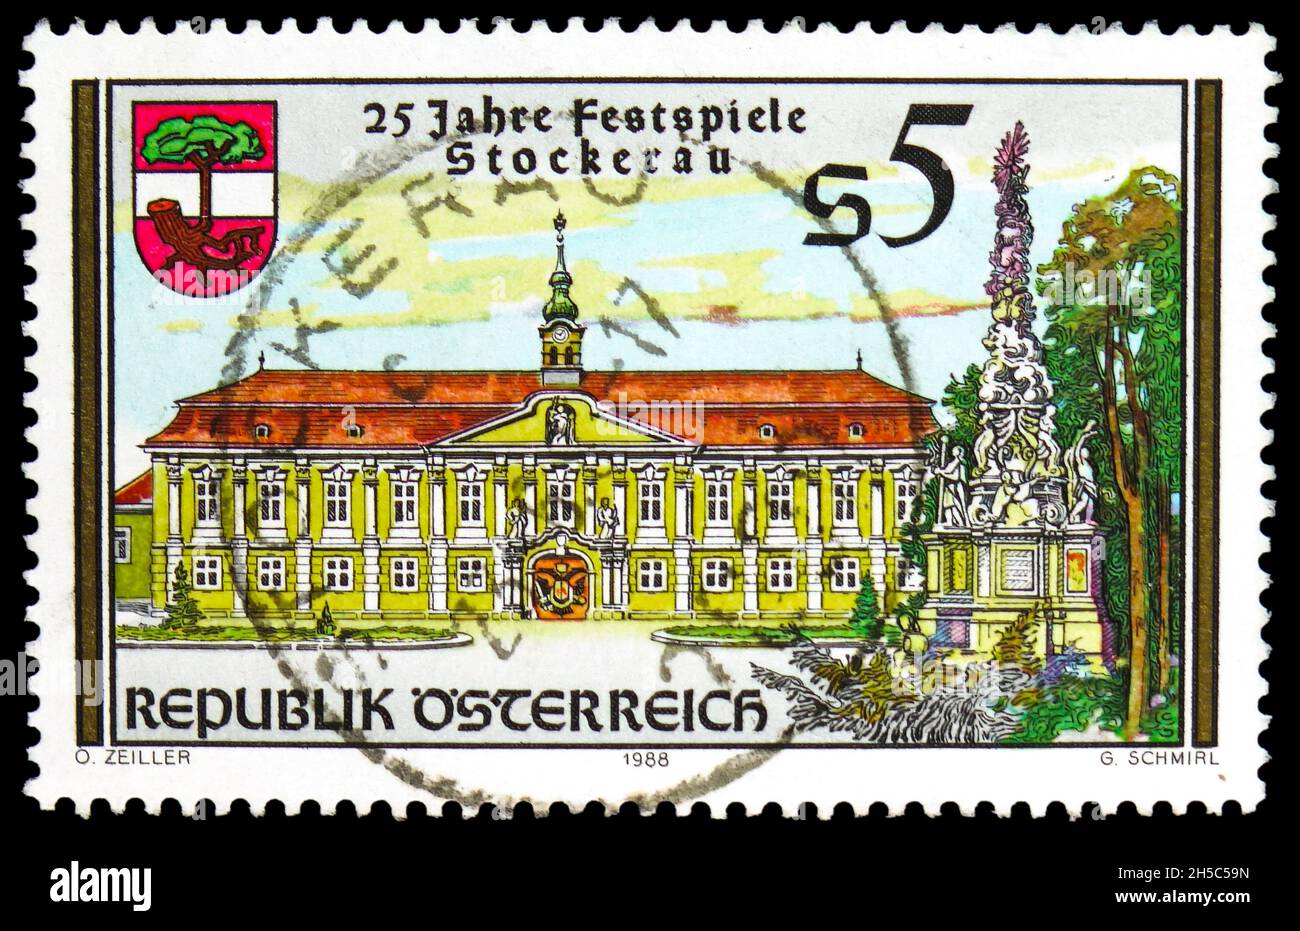 MOSCOW, RUSSIA - OCTOBER 24, 2021: Postage stamp printed in Austria shows 25th Anniversary of Stockerau Festival, circa 1988 Stock Photo